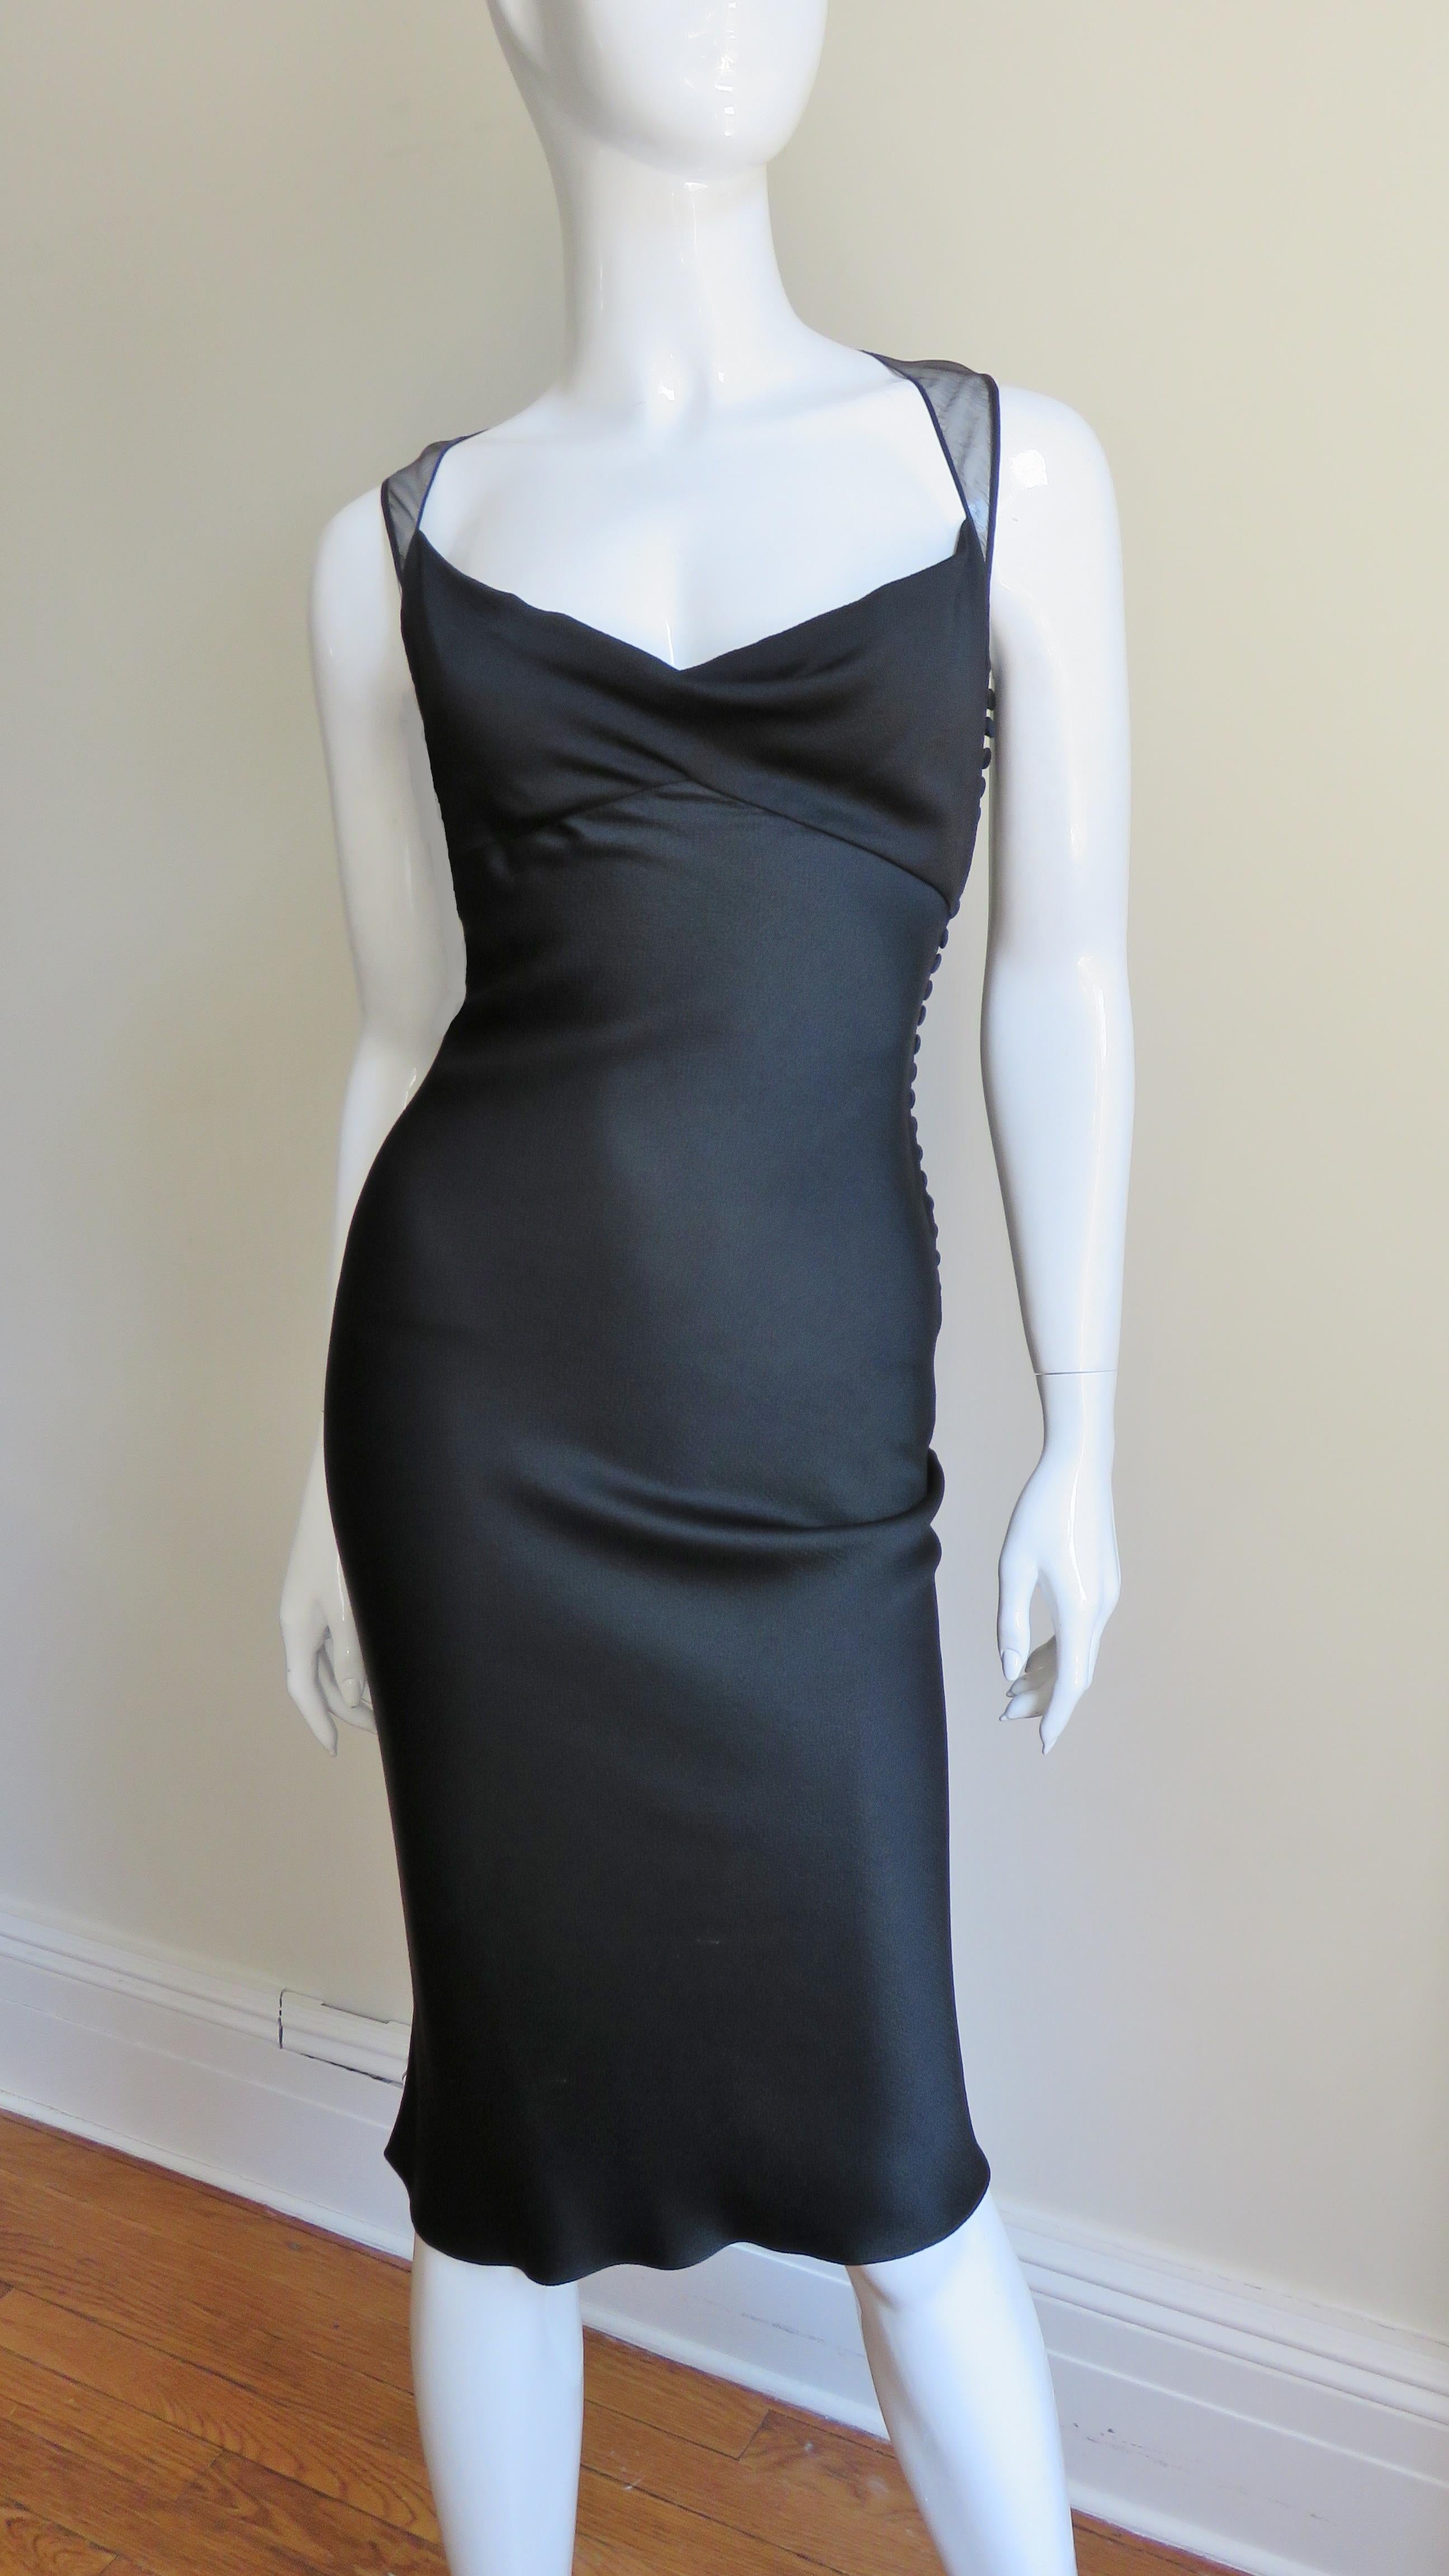 A beautiful black silk dress from John Galliano for Christian Dior.  It is fitted with a front bust crossing inset sweetheart neckline with sheer straps forming a sheer low V back.  The dress conforms to the wearer due to it's bias cut and the skirt